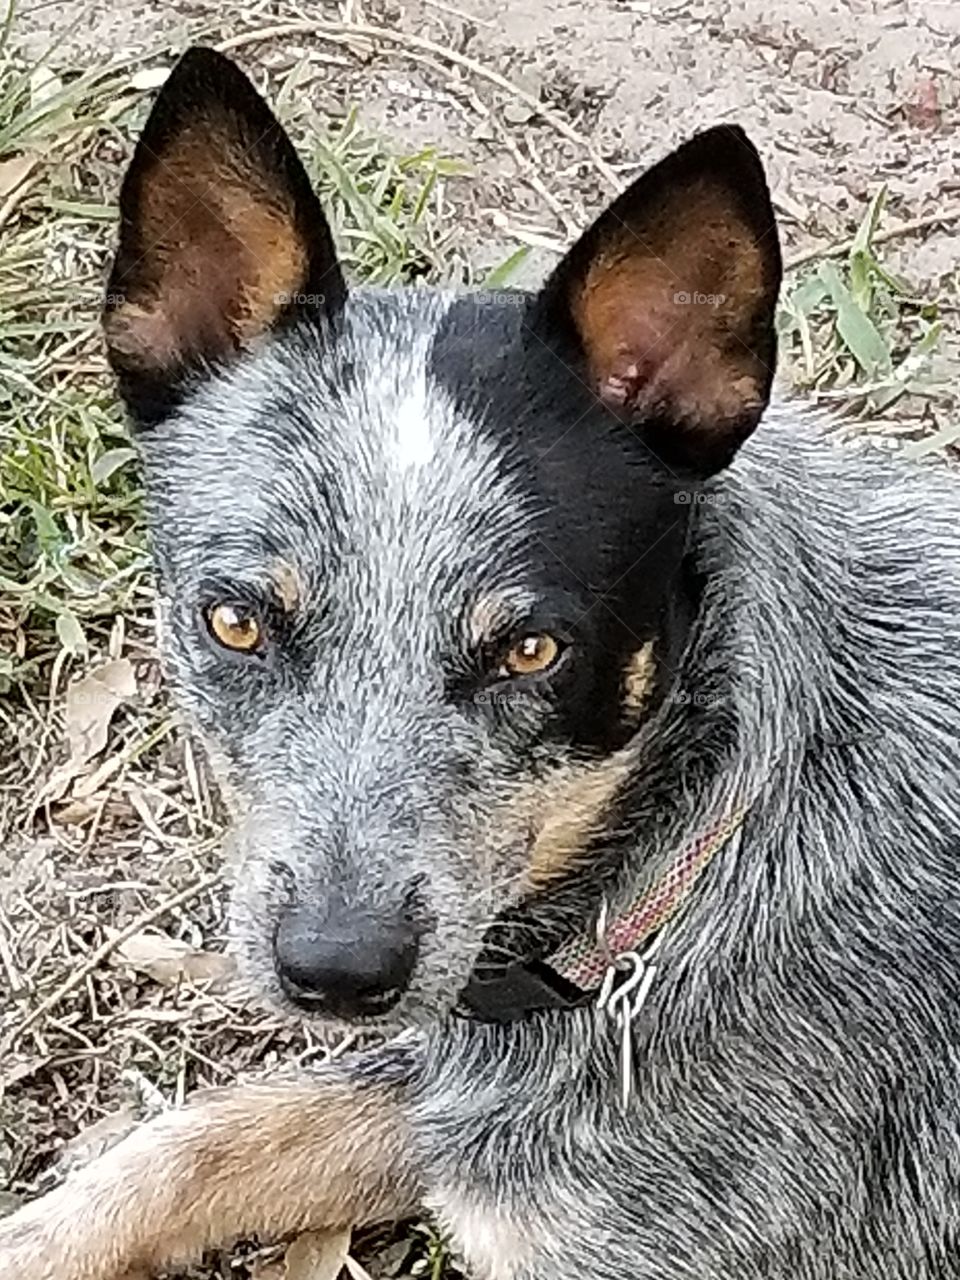 Bleu the blue heeler rescued 4 months ago he is the wildchild of the family who loves to play frisbee